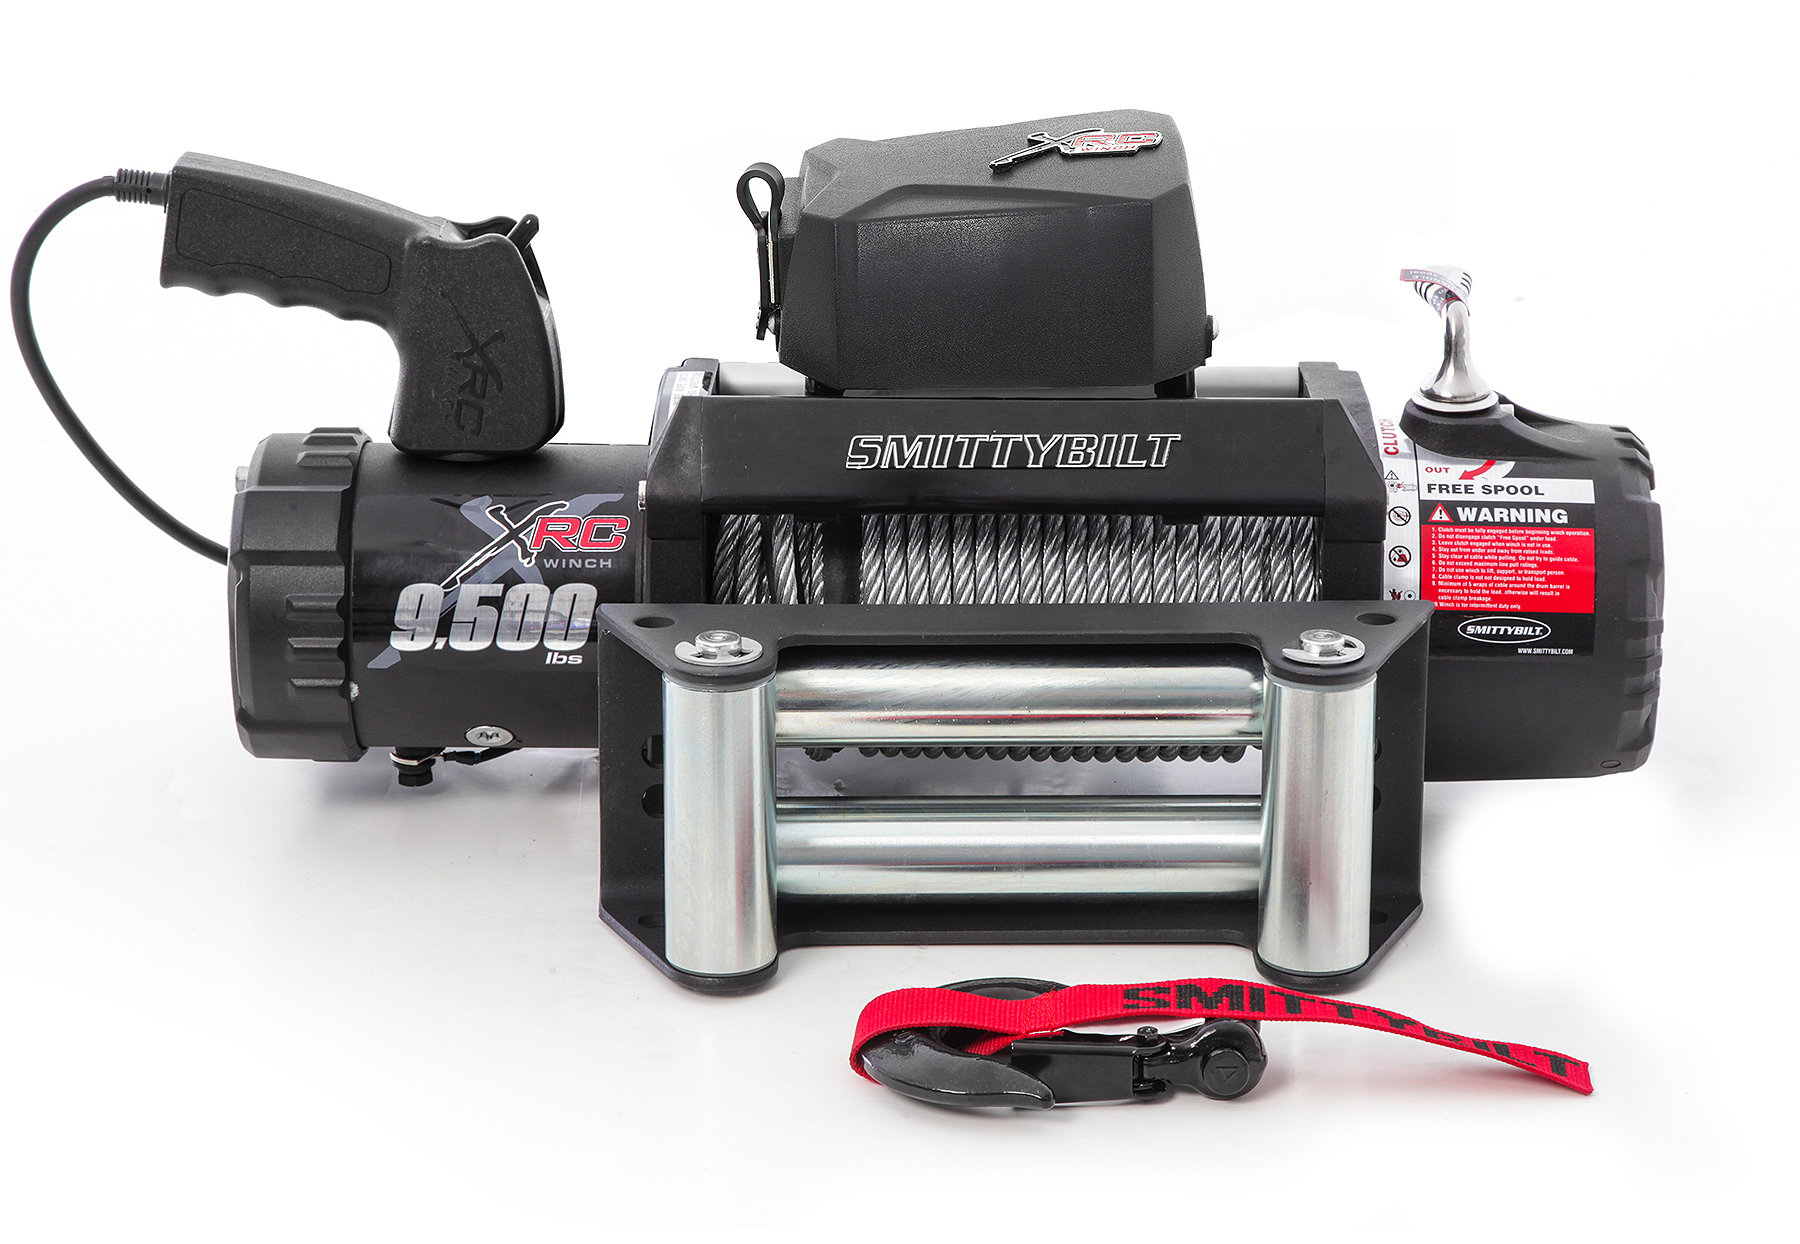 All About the Smittybilt XRC 9500 [Definitive Guide] - Roundforge